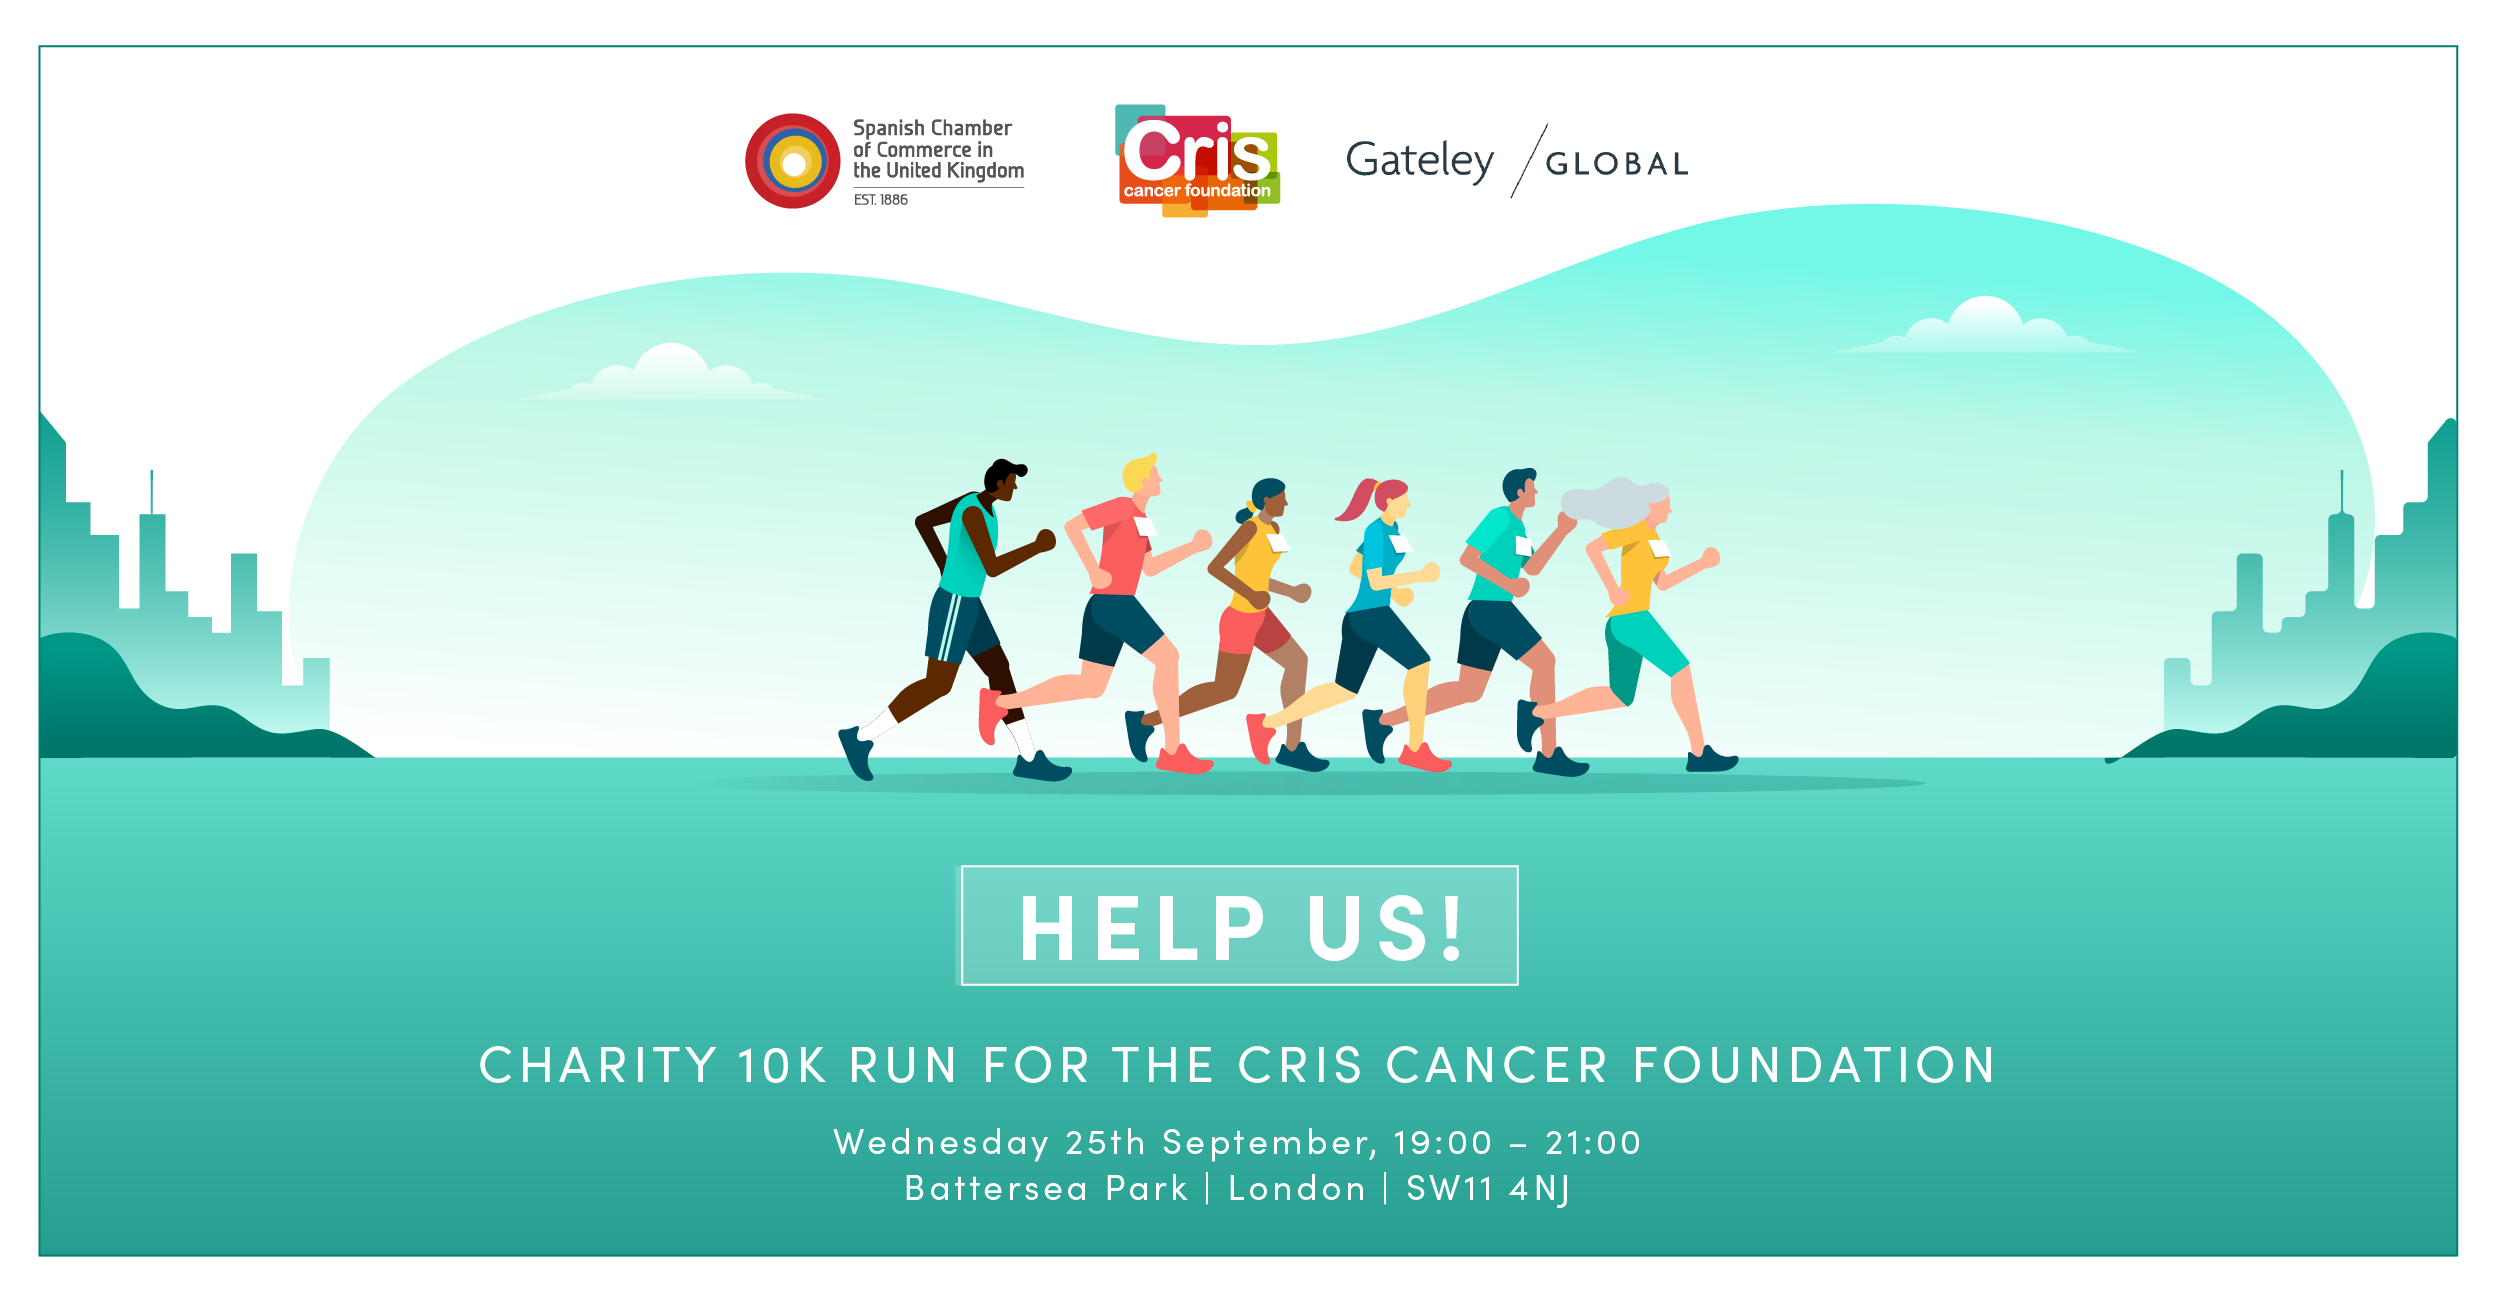 HELP US! | CHARITY 10k RUN FOR THE CRIS CANCER FOUNDATION